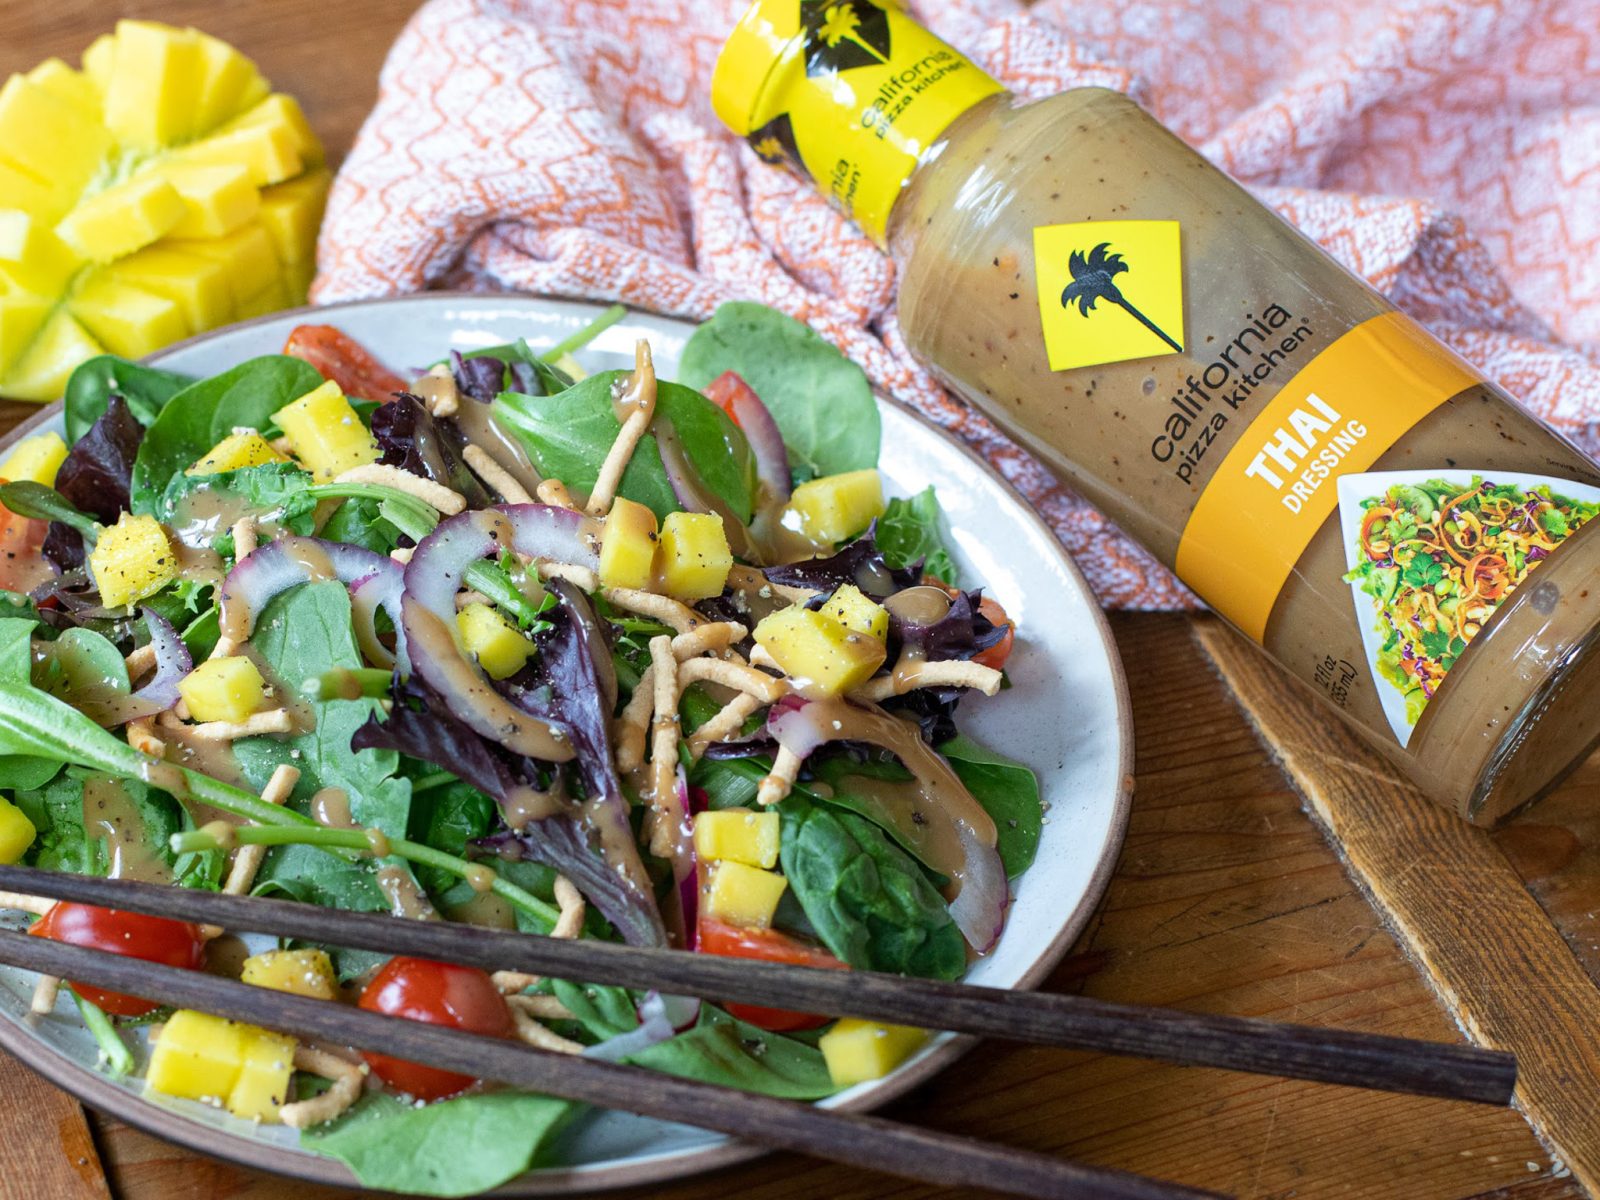 California Pizza Kitchen Dressing As Low As $1.99 At Kroger